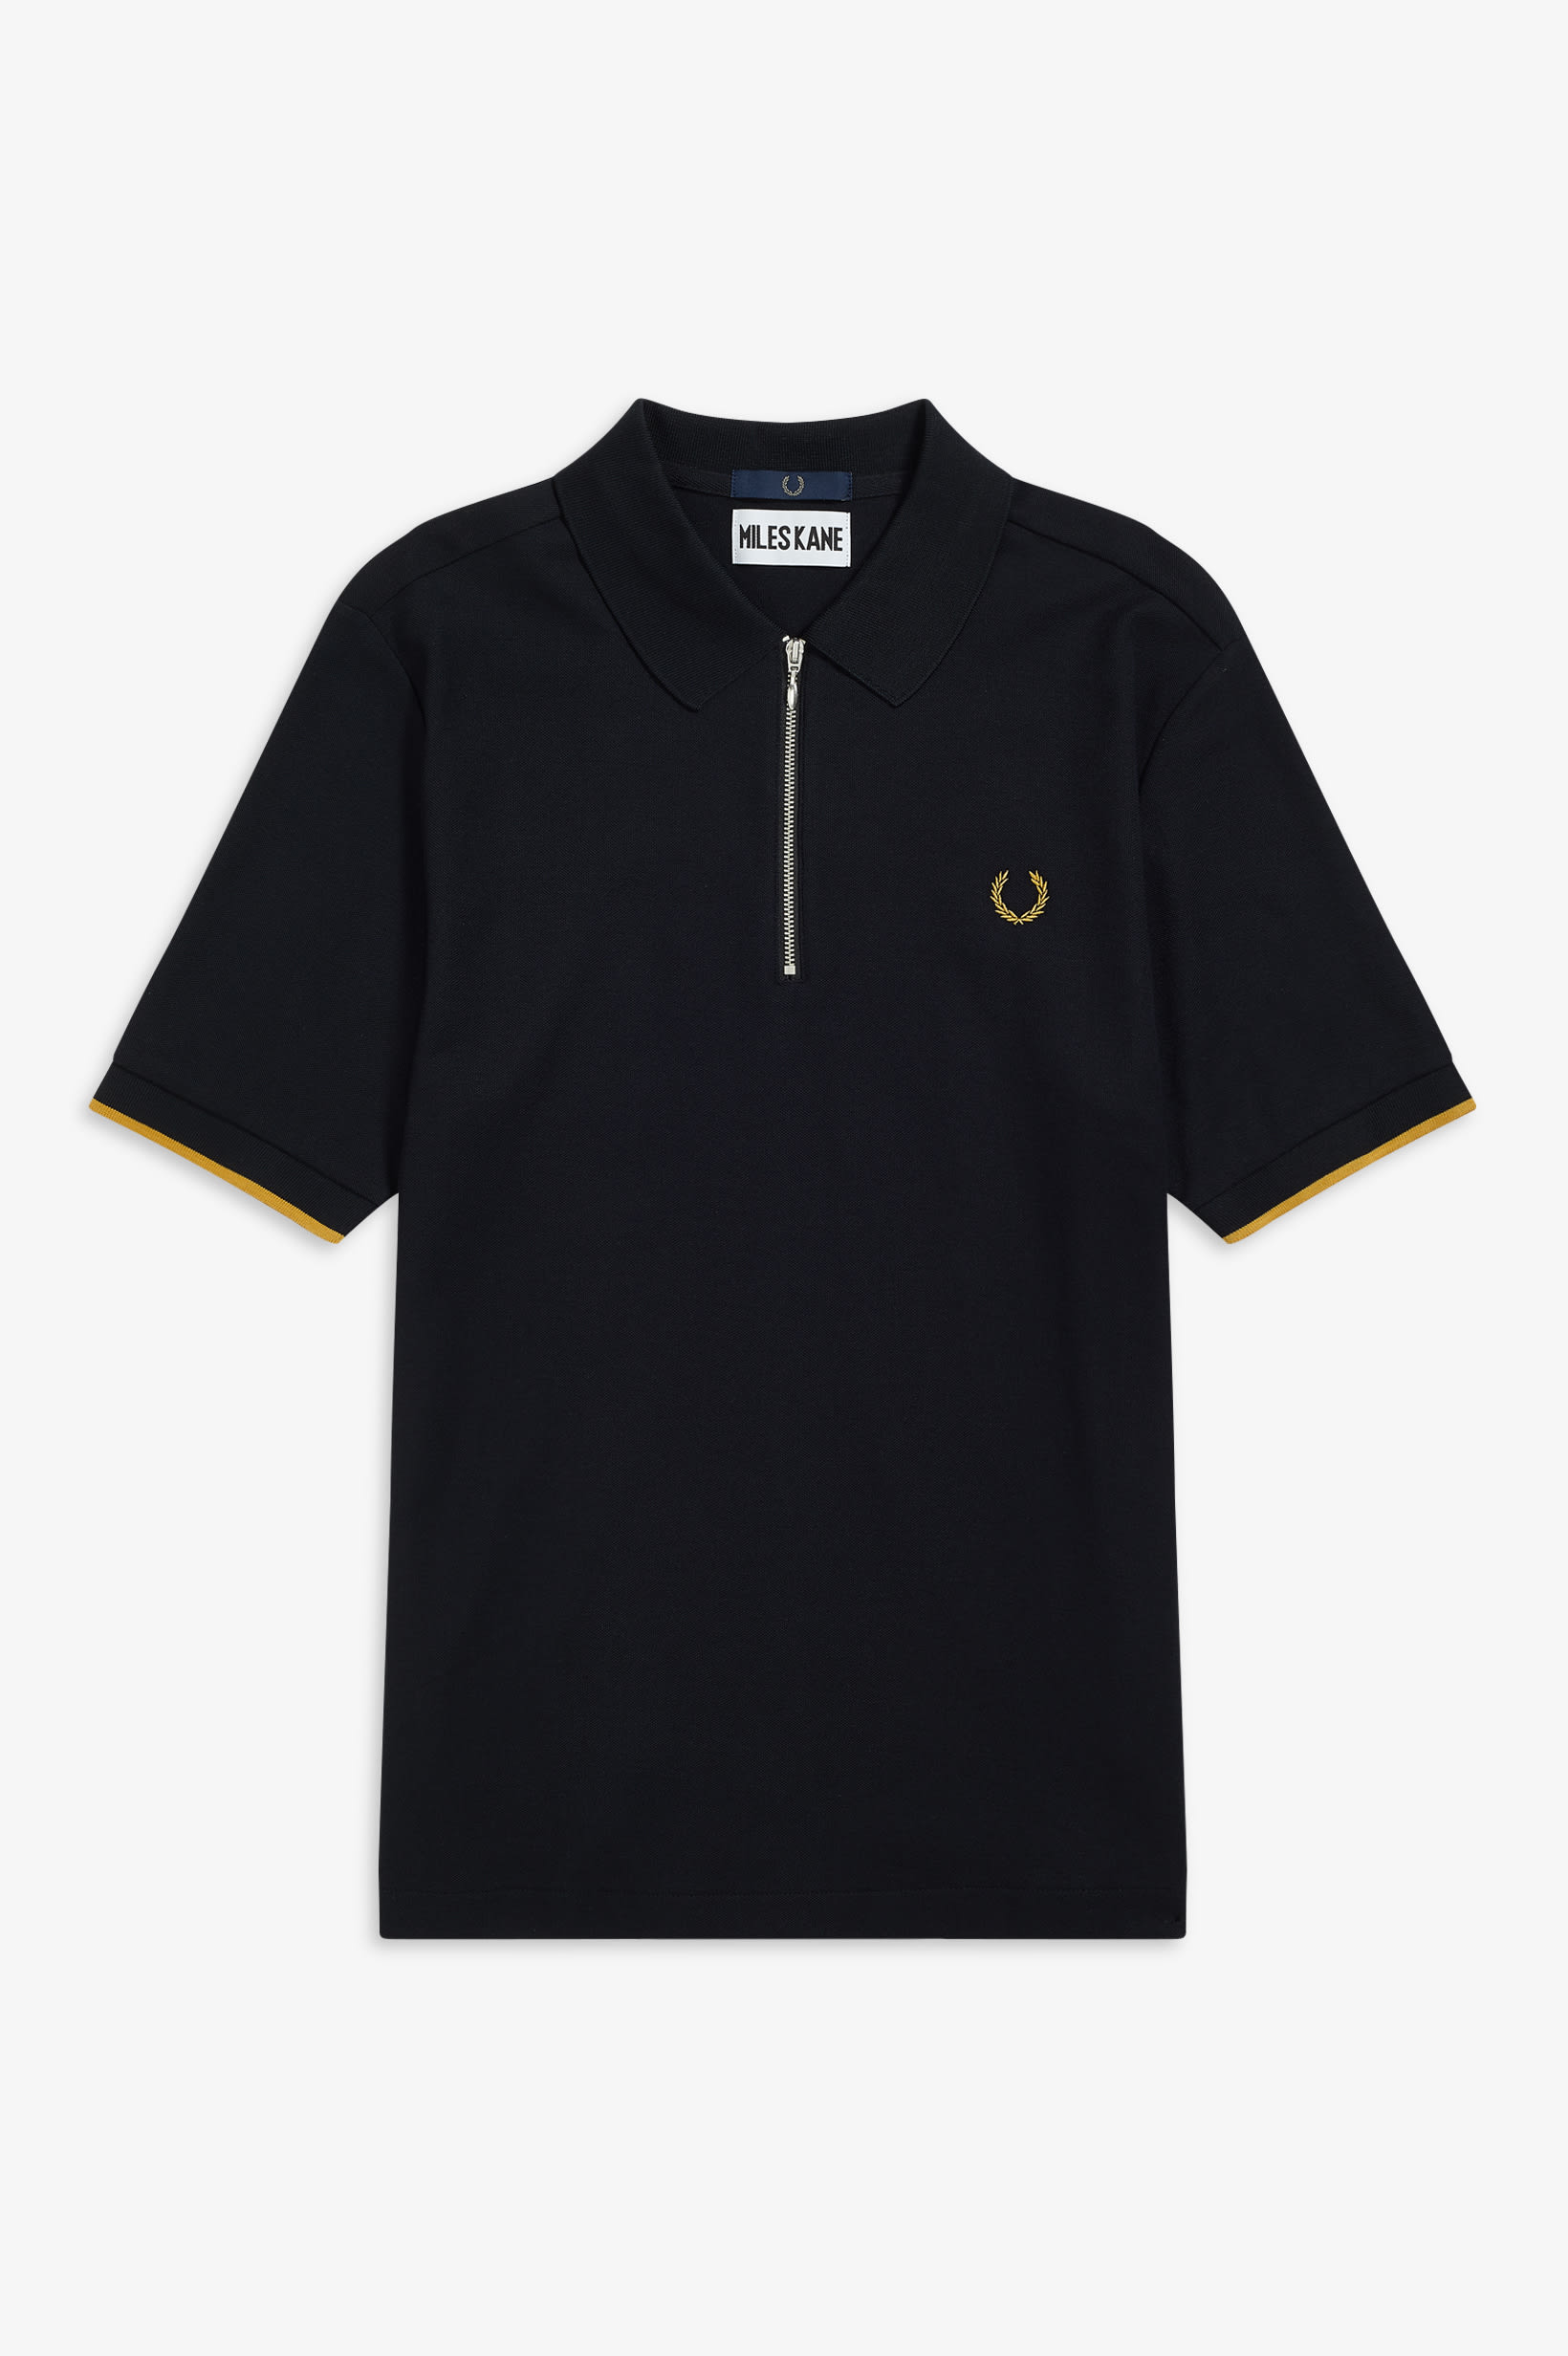 fred-perry-miles-kane-19-5